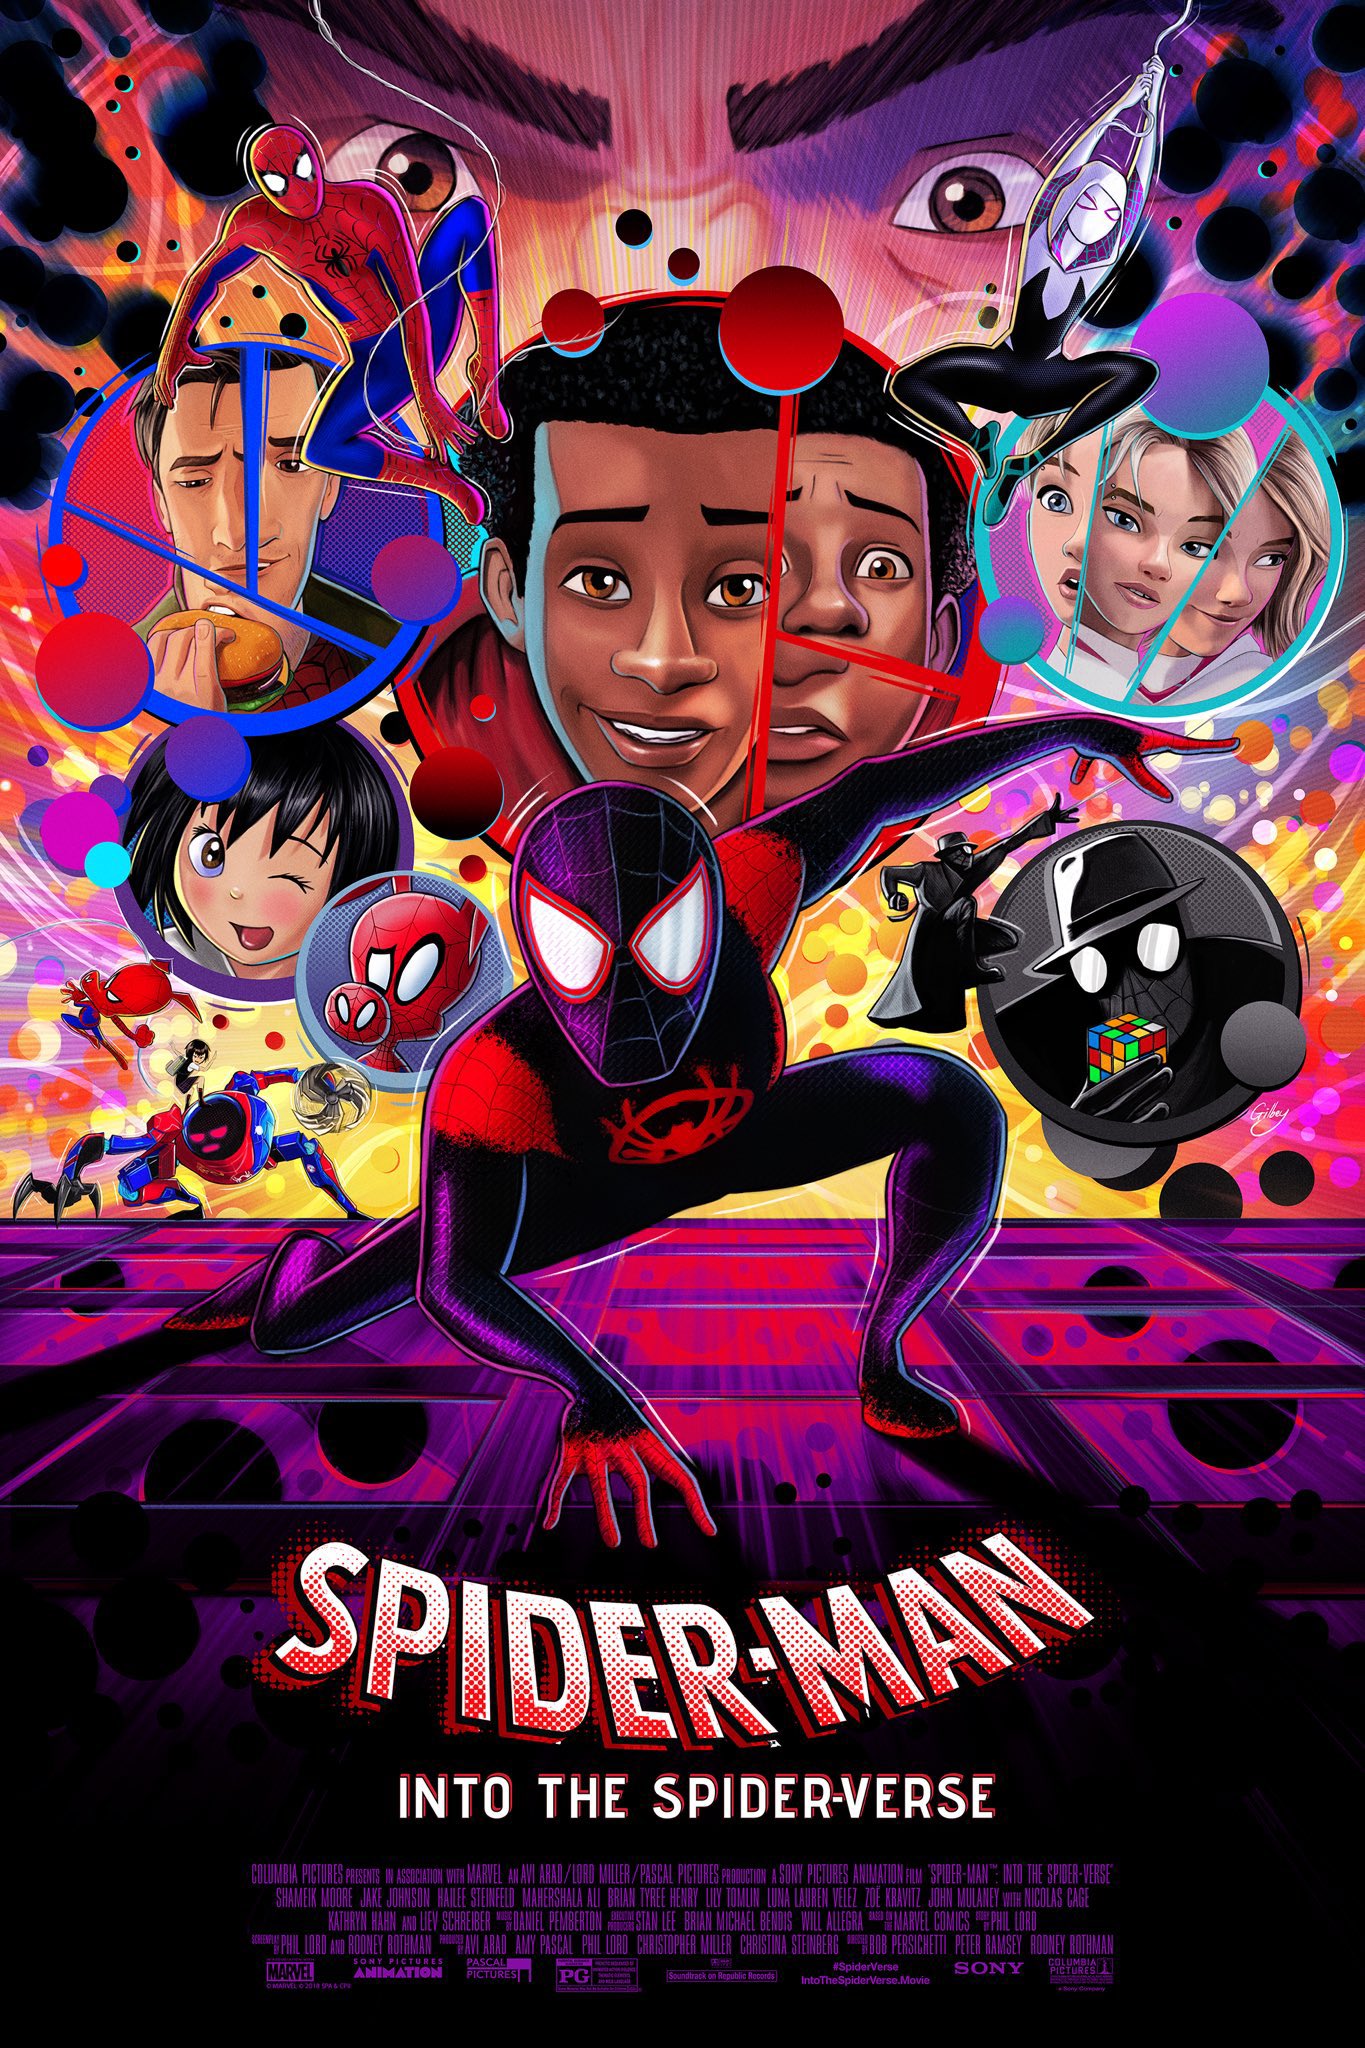 New Spider Man Into The Spider Verse Posters Spotligh vrogue.co